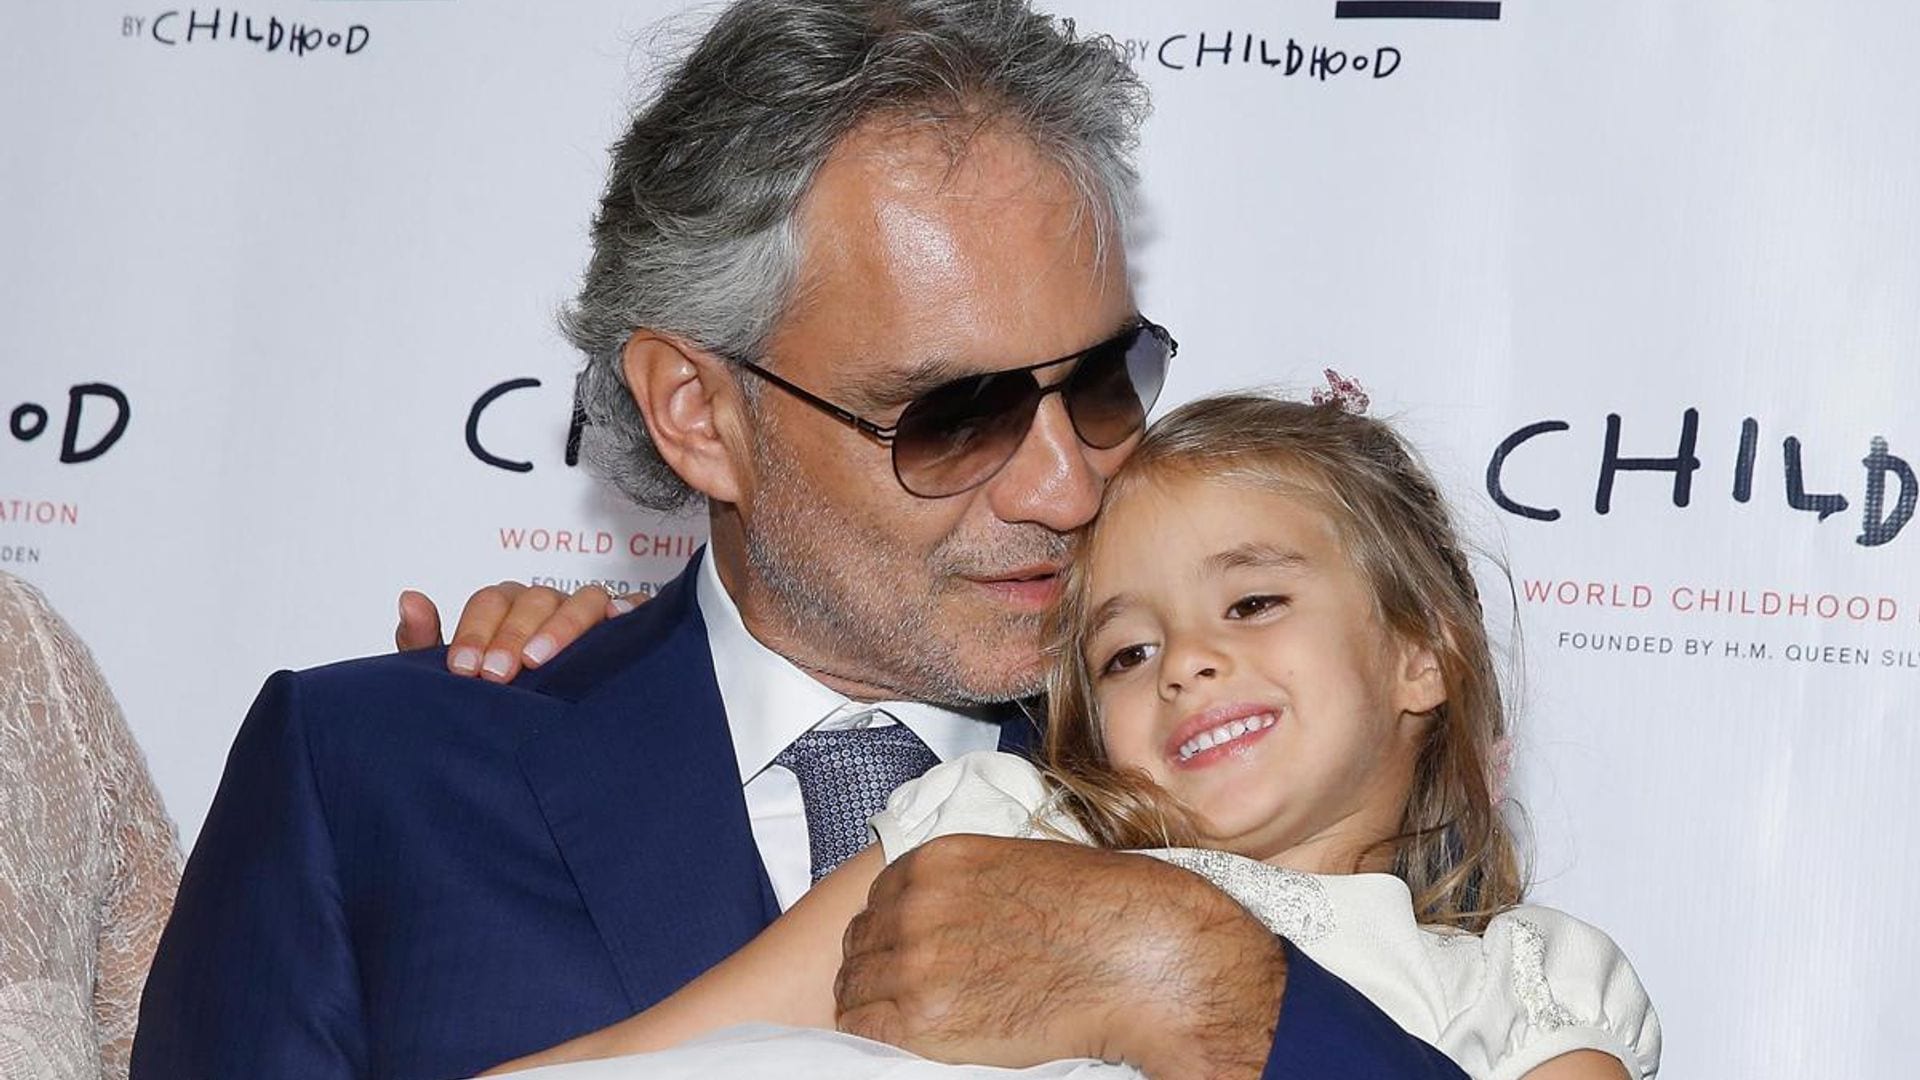 Andrea Bocelli’s 8-year-old daughter is stepping into the spotlight for his Christmas concert: Details